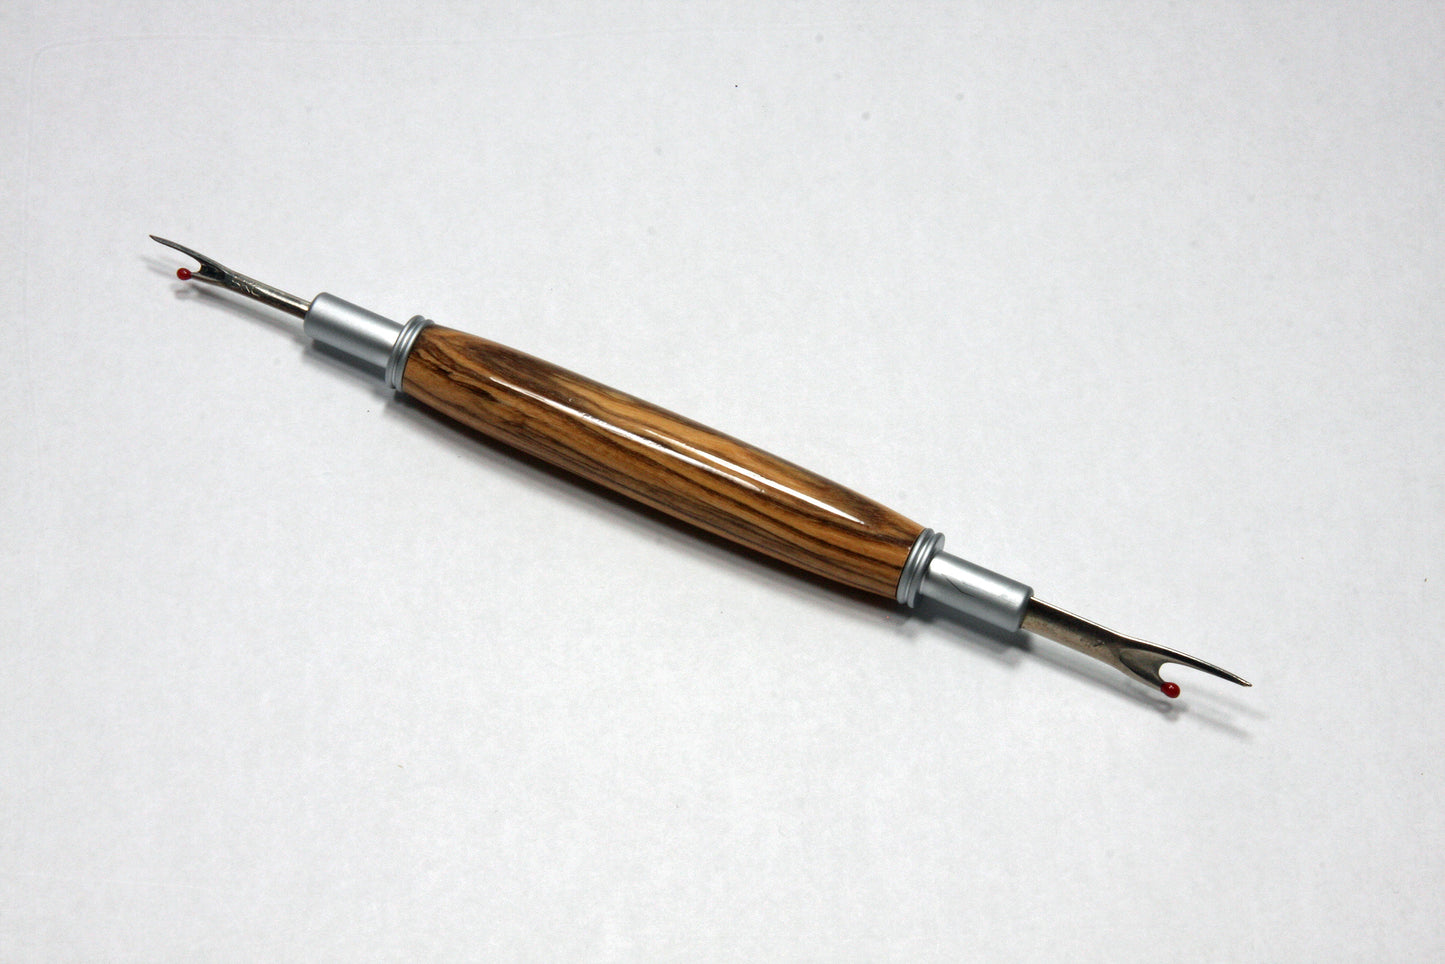 Handcrafted Olivewood Double-Bladed Seam Ripper - Perfect Gift for Seamstresses and Crafters